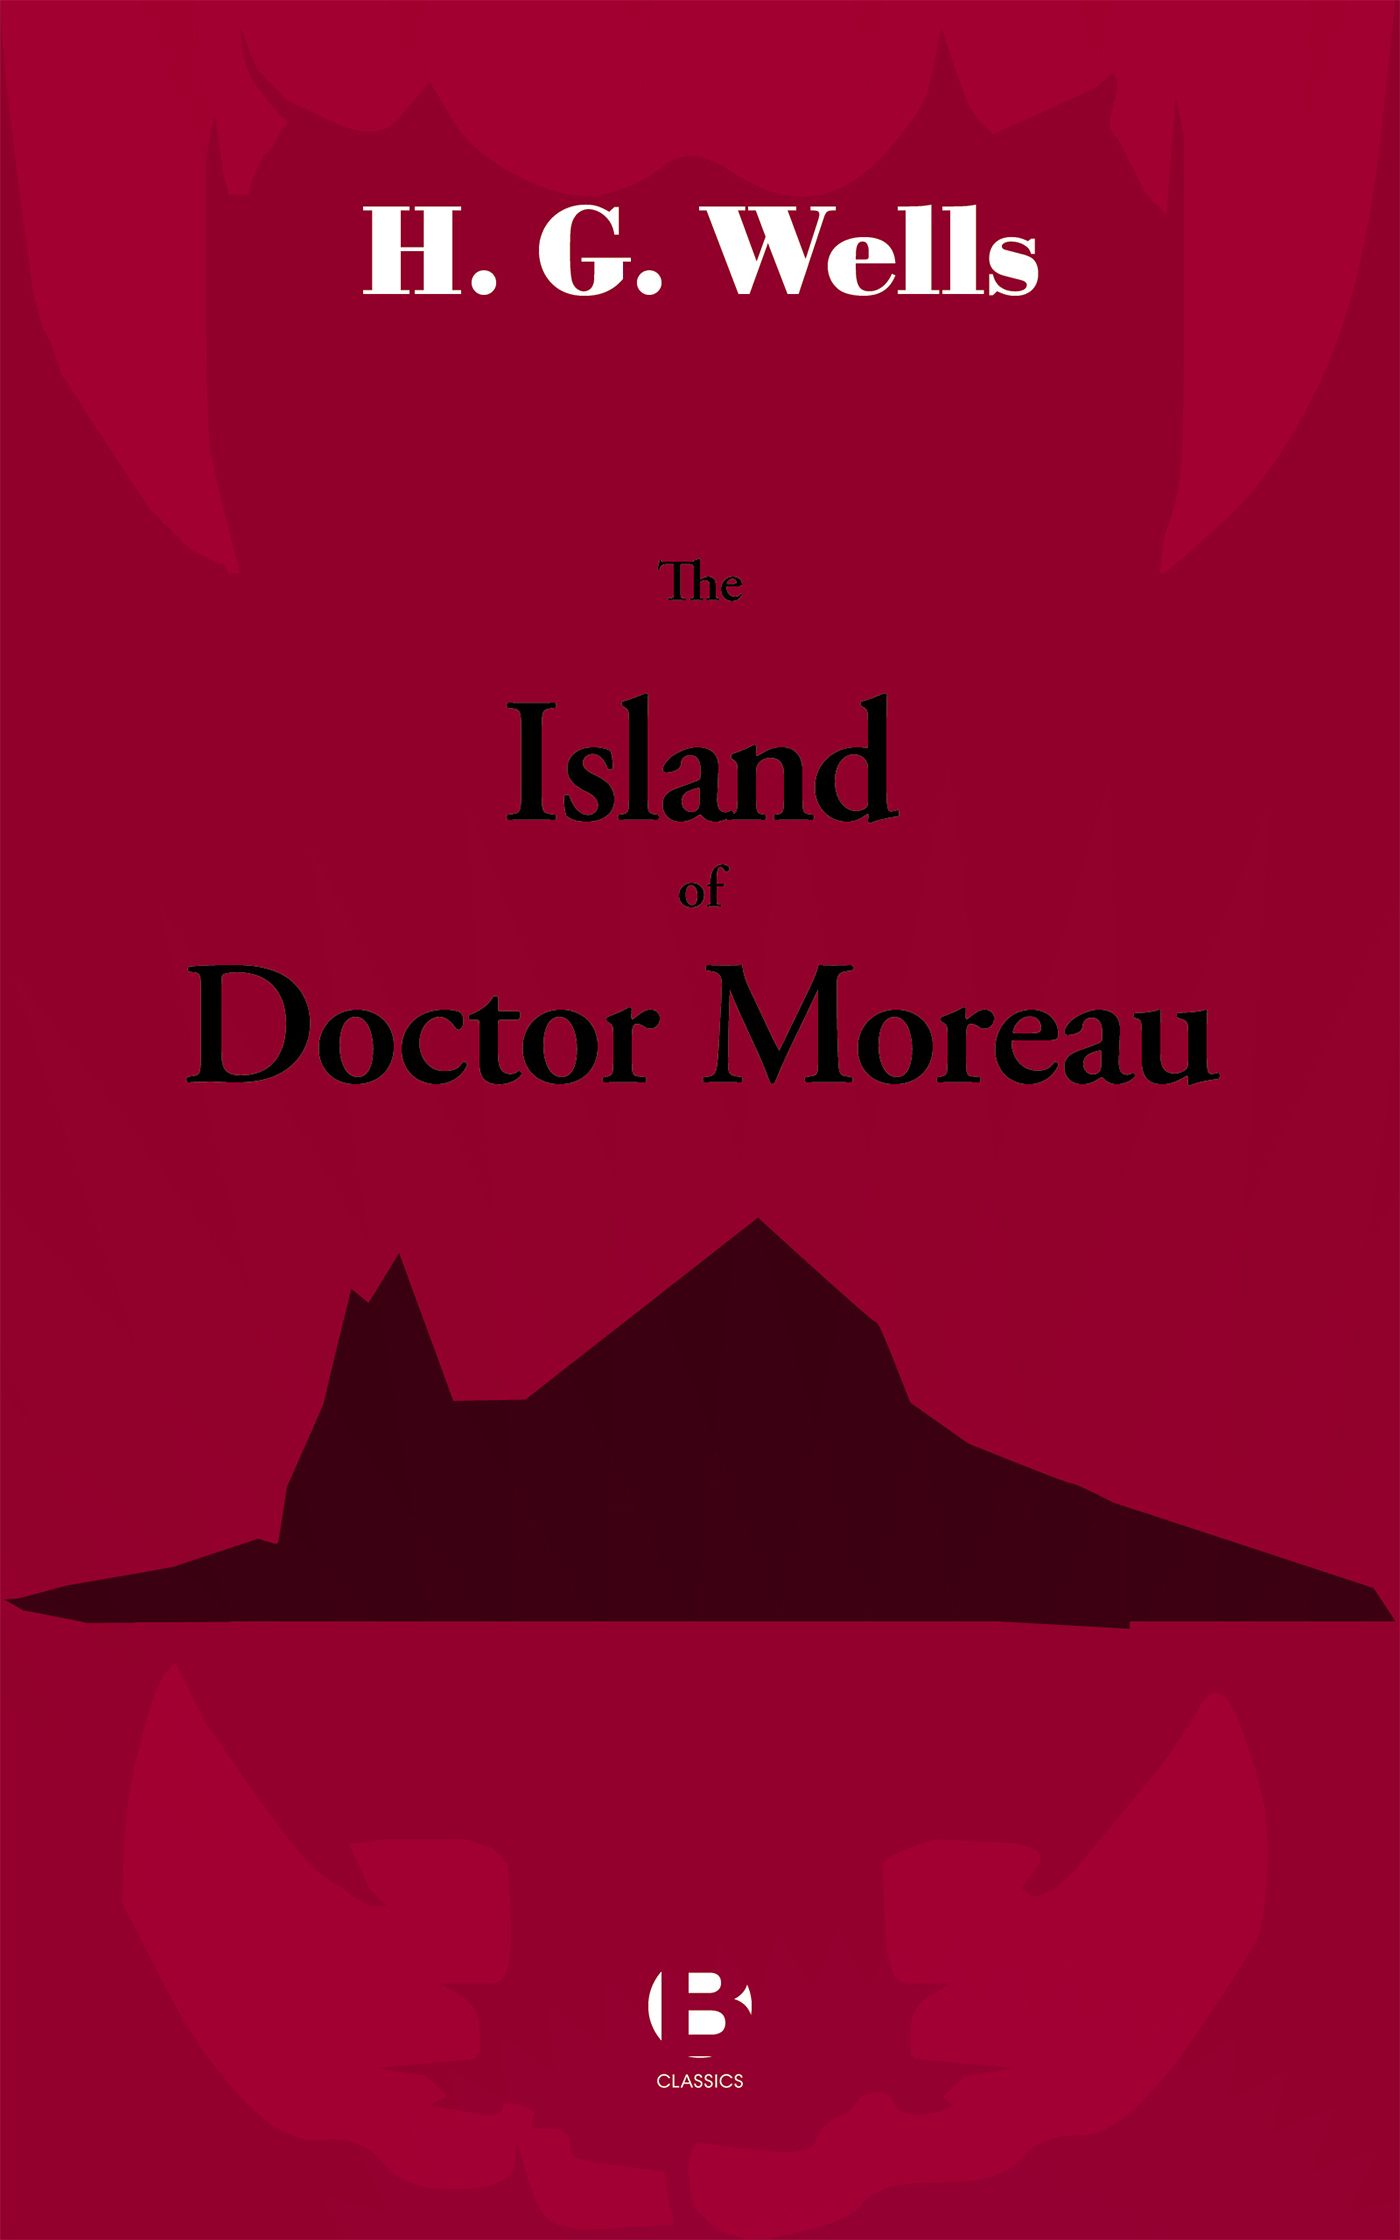 The Island of Doctor Moreau, eBook by H. G. Wells